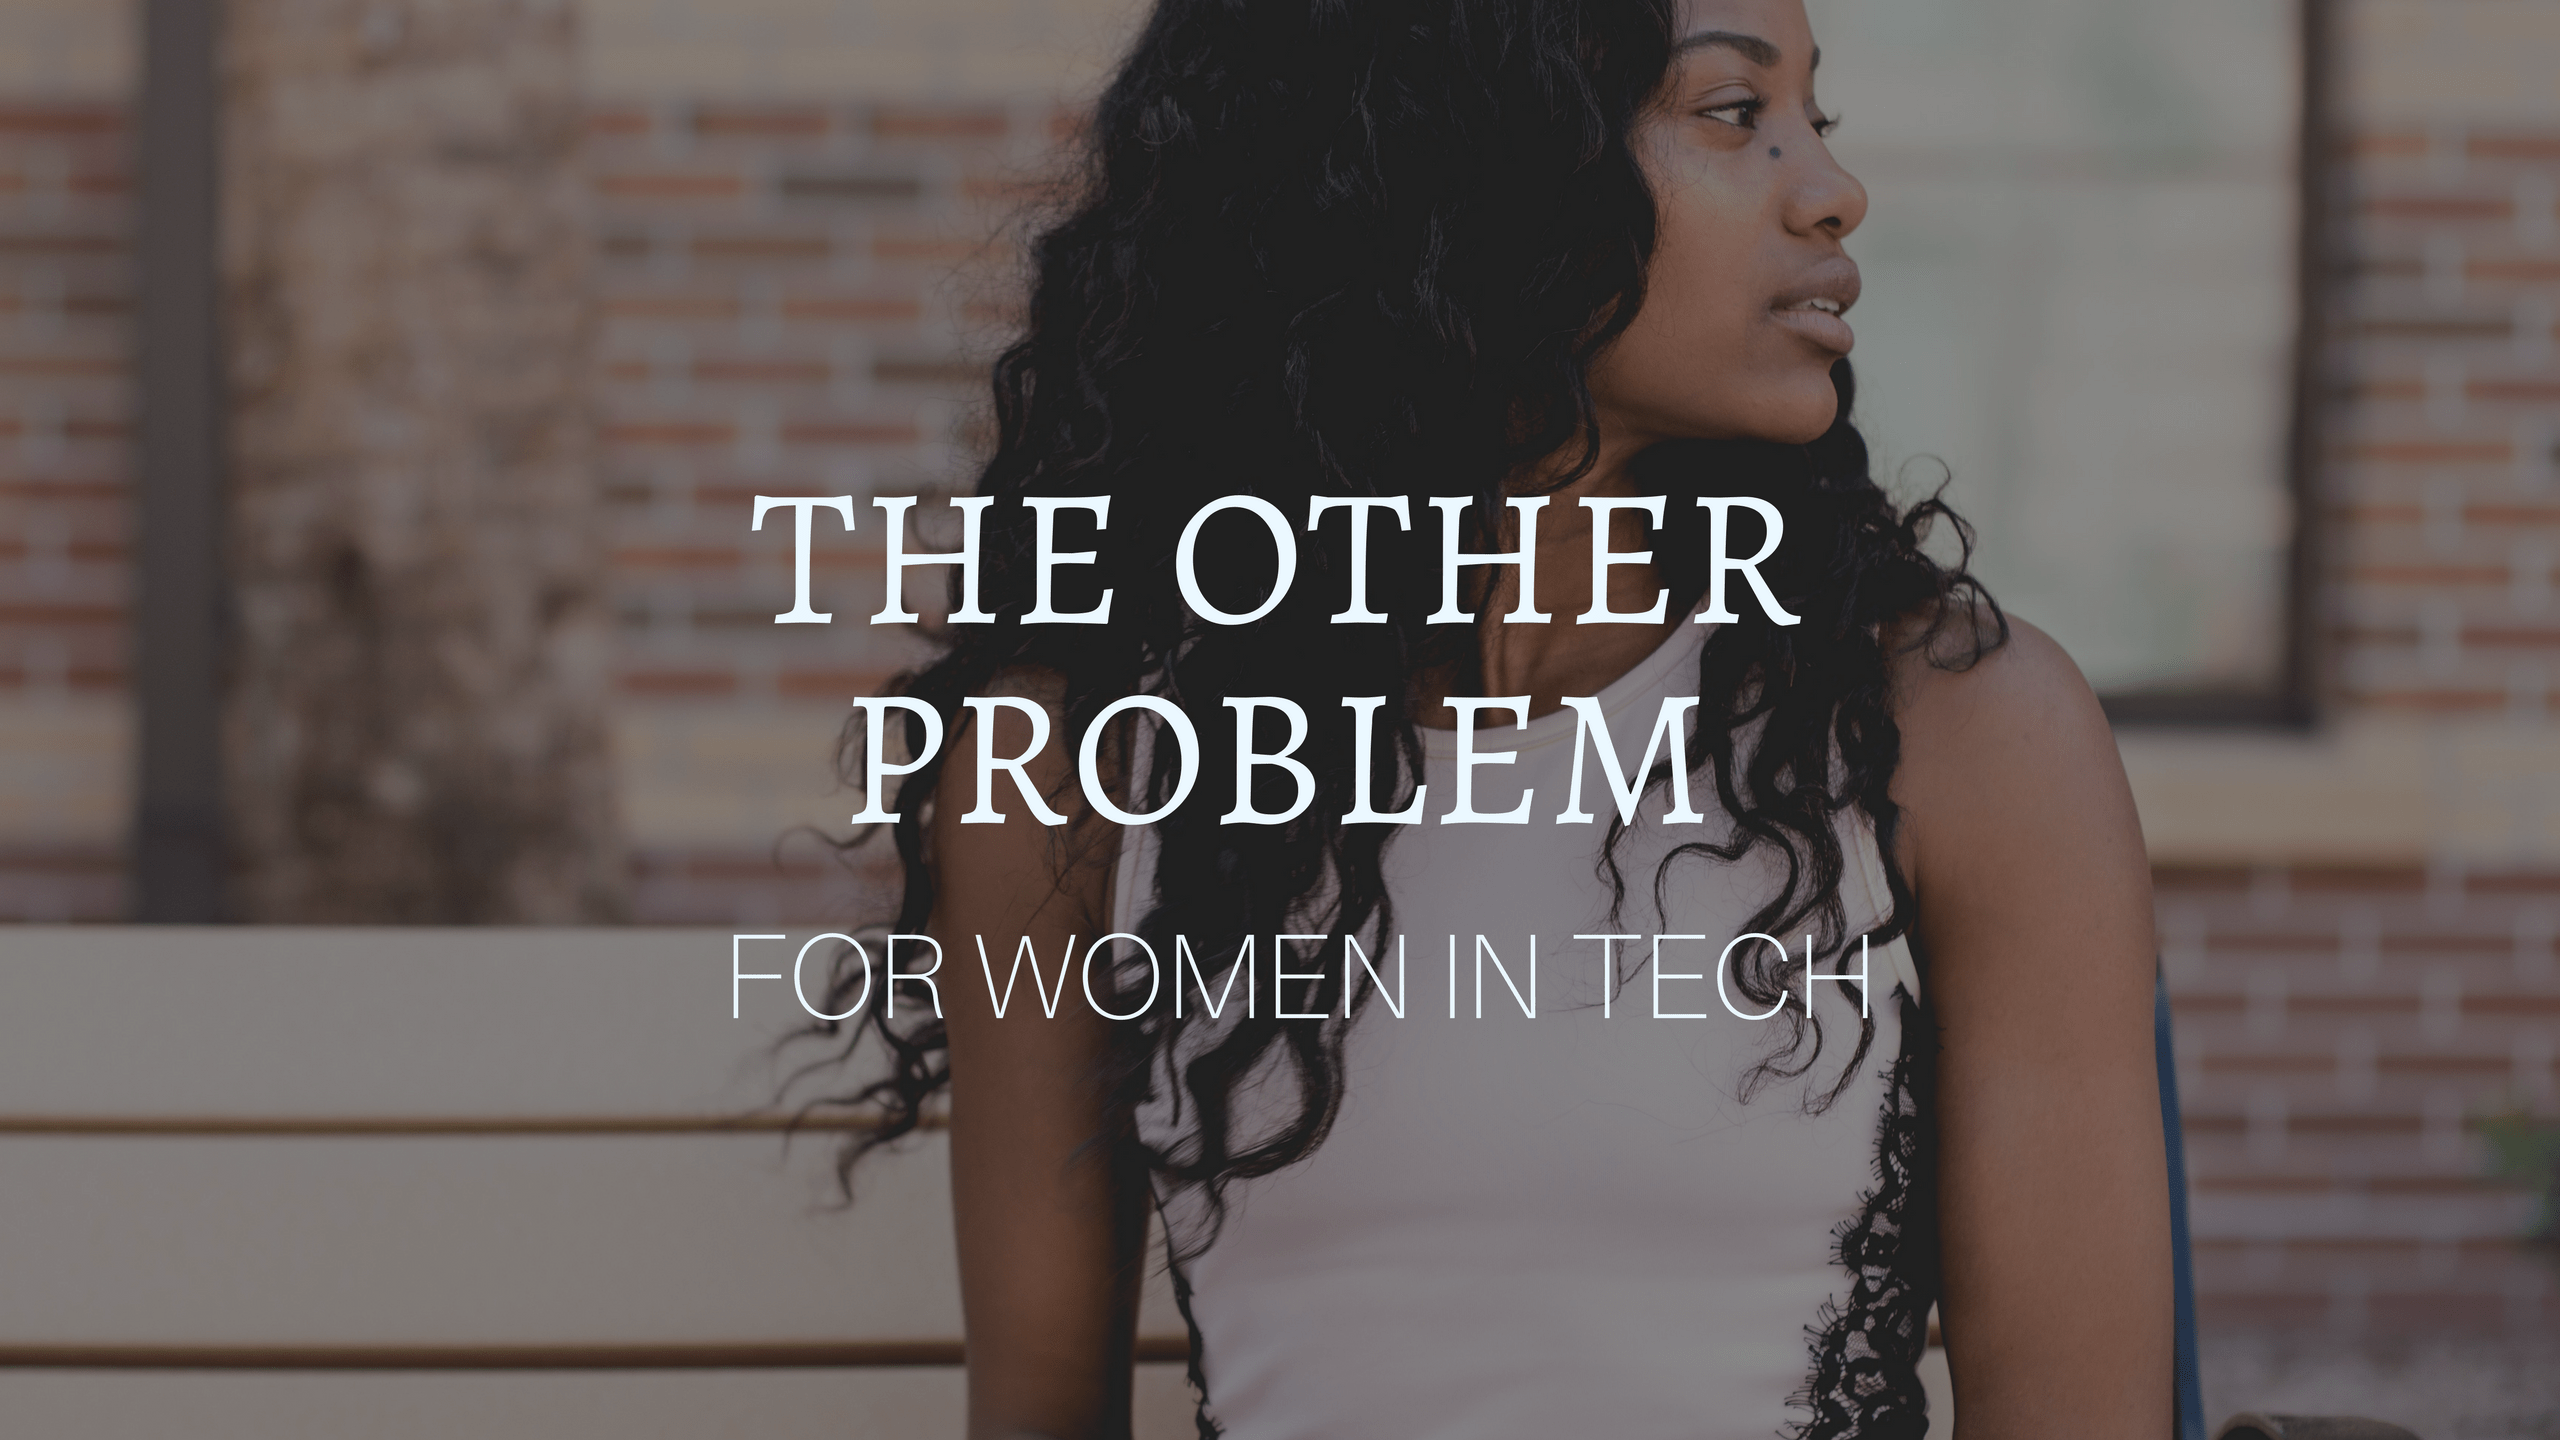 The other problem for women in Tech